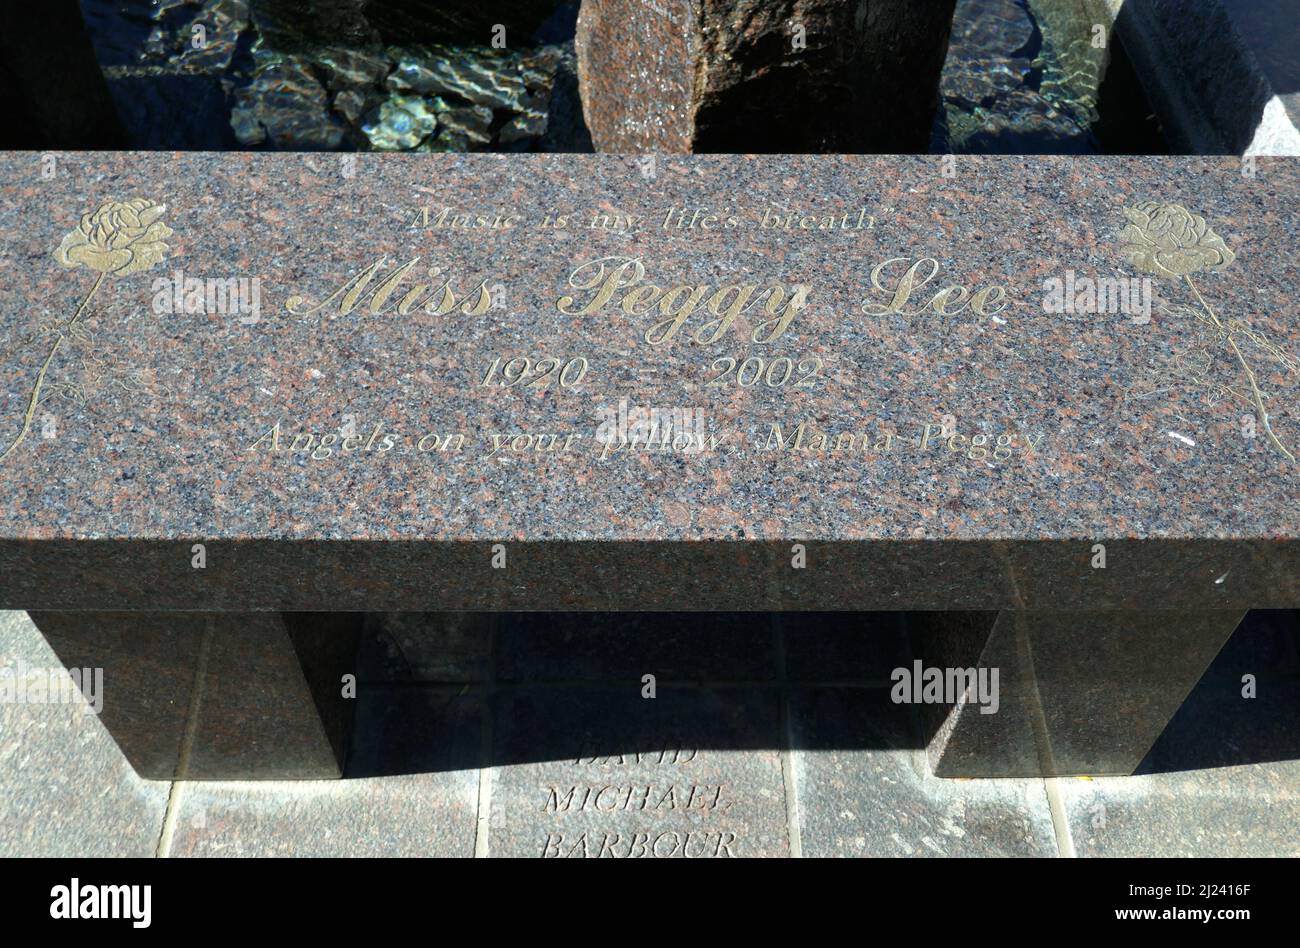 Los Angeles, California, USA 21st March 2022 A general view of atmosphere of Singer Peggy Lee's Grave/Bench and David Michael Barbour's Grave at Pierce Brothers Westwood Village Memorial Park on March 21, 2022 in Los Angeles, California, USA. Photo by Barry King/Alamy Stock Photo Stock Photo